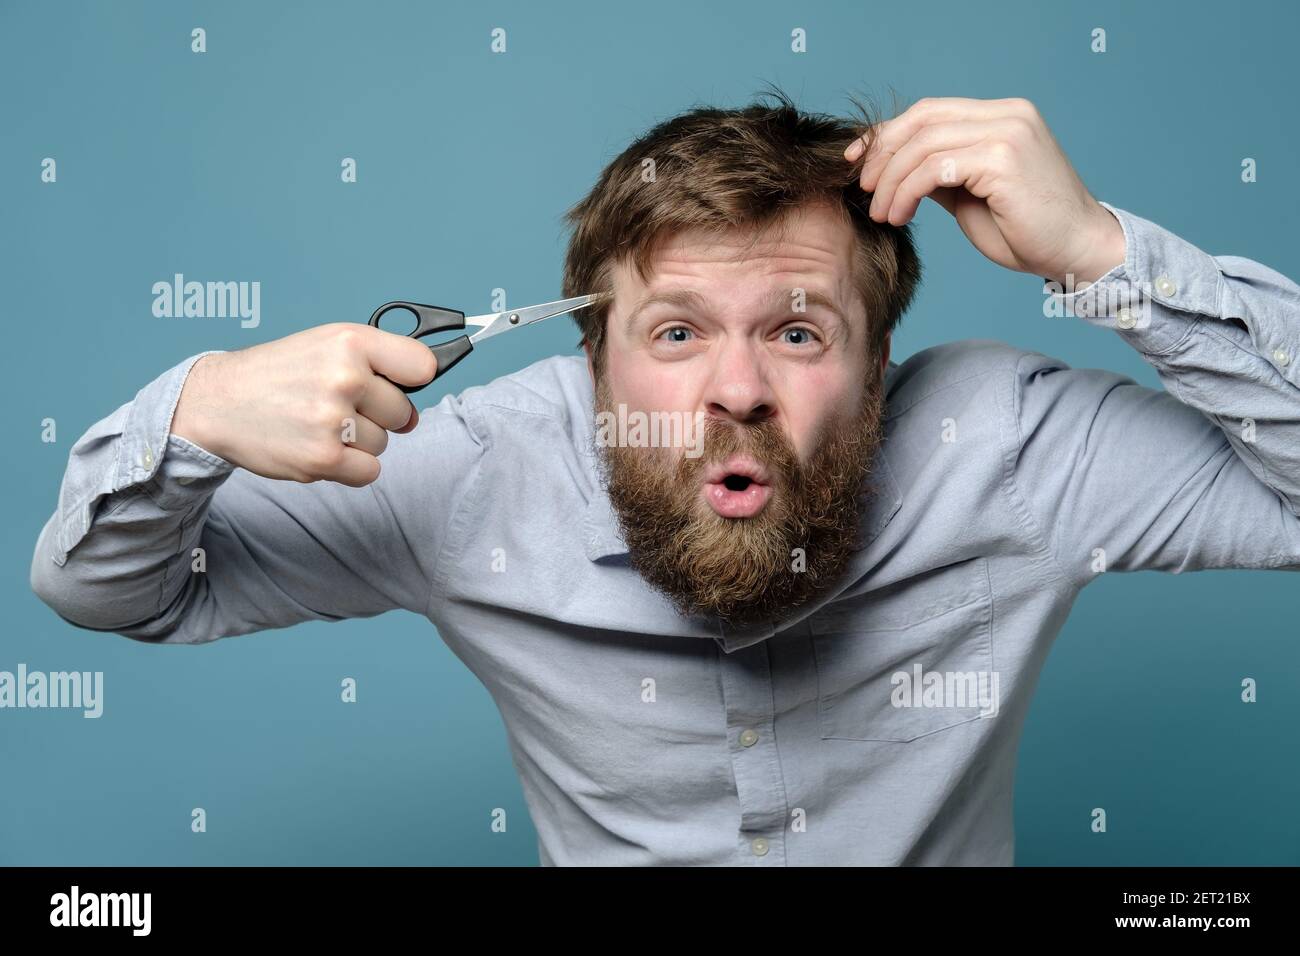 An annoyed, shaggy man holding hair scissors to his head as if it were a gun, he had not visited a barbershop for a long time. Stock Photo